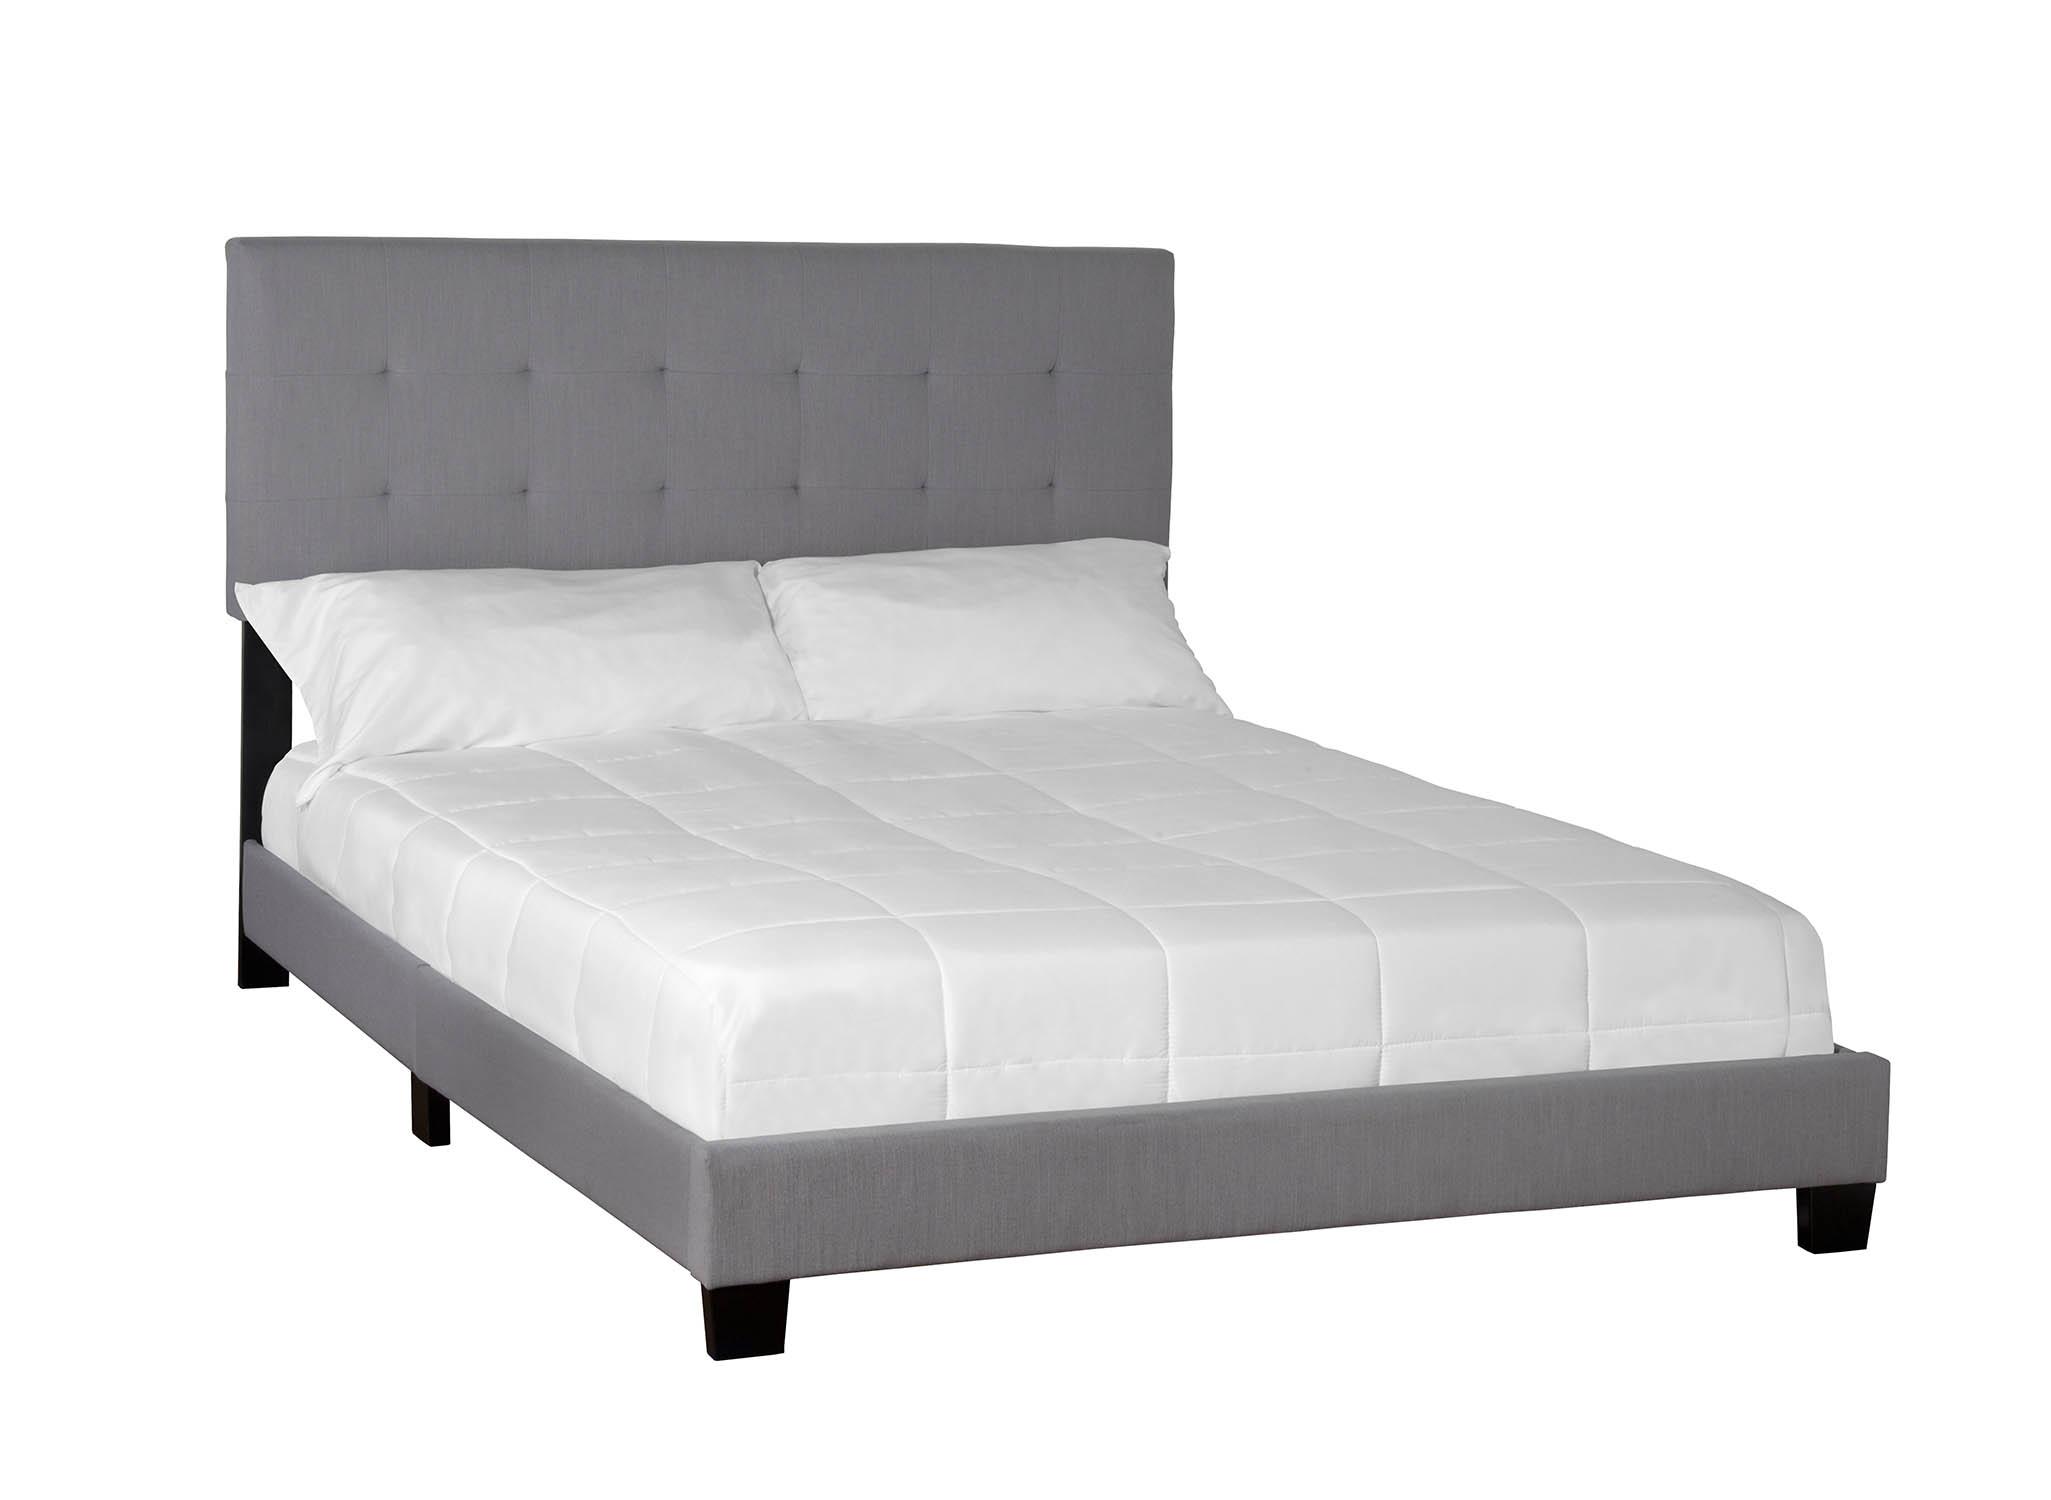 Modern, Transitional Panel Bed EDEN 1600DS-110 1600DS-110 in Gray Fabric